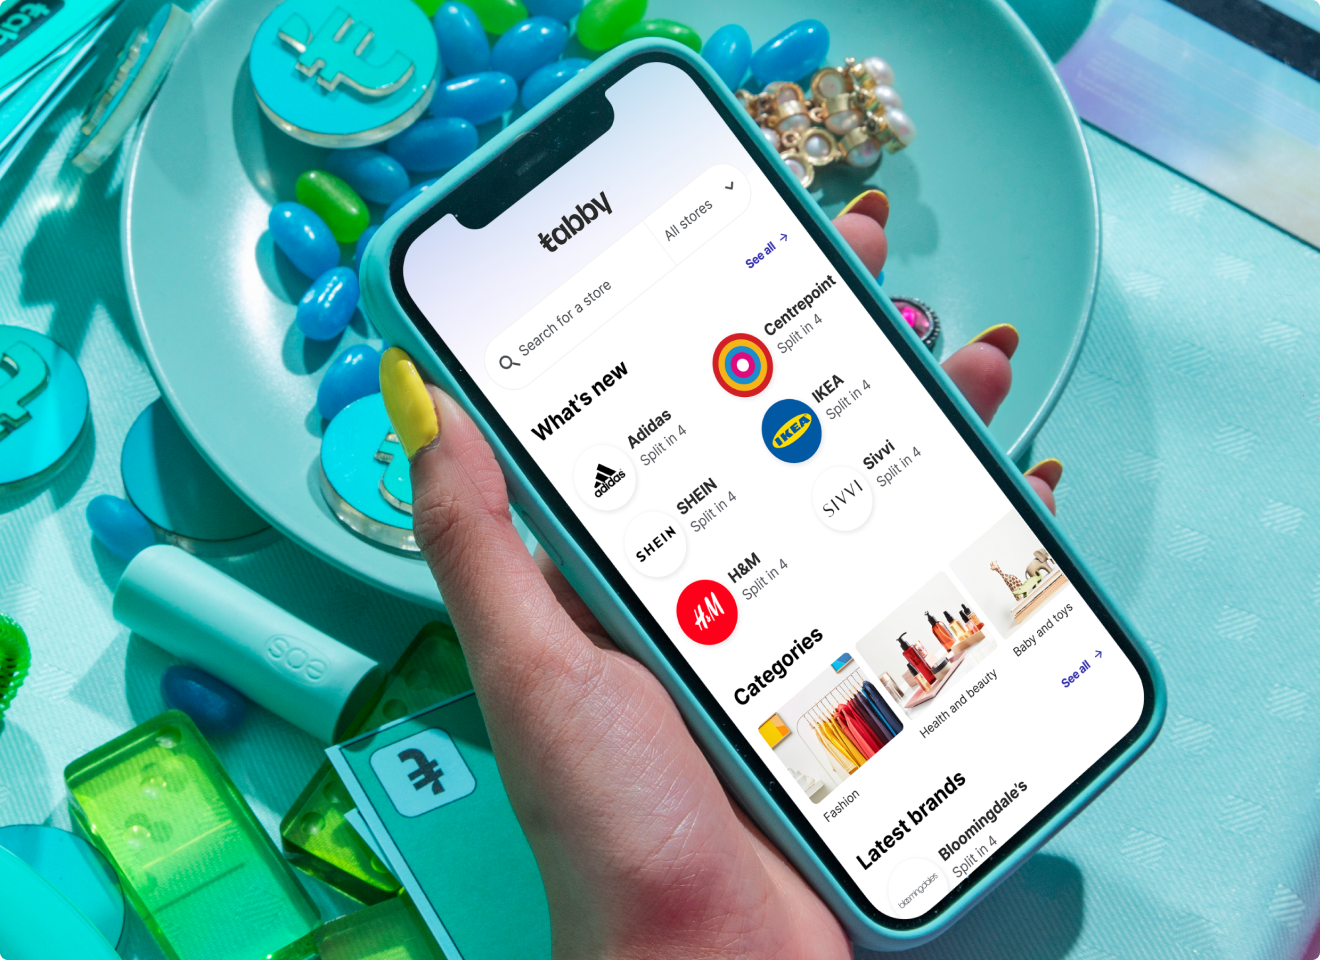 All your shopping. One app.